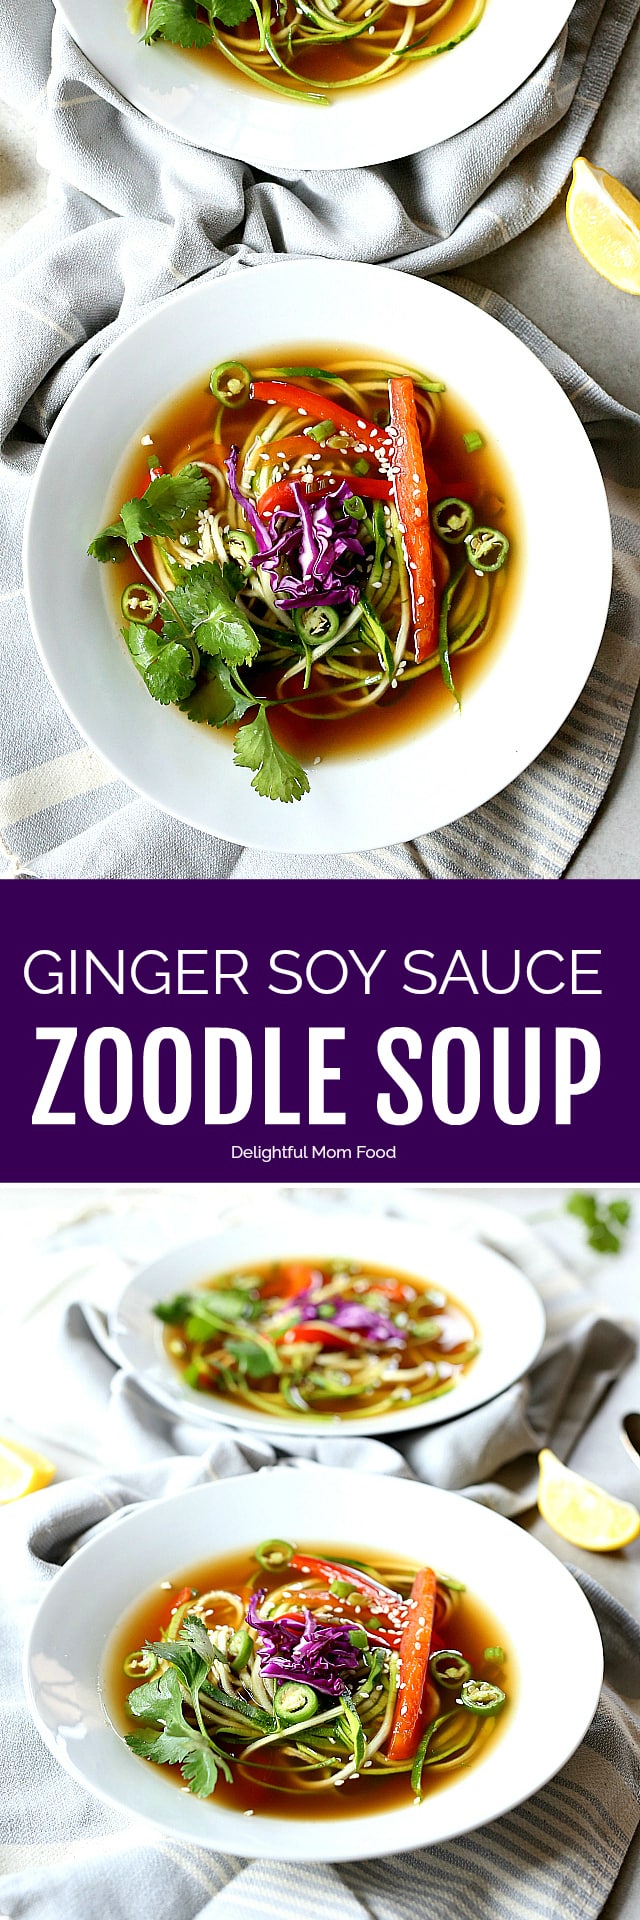 A spicy soy sauce-based ginger soup broth with sweet red bell peppers, green onions, zoodles and jalapenos. A household favorite grain free vegetarian zucchini soup recipe in 30 minutes!